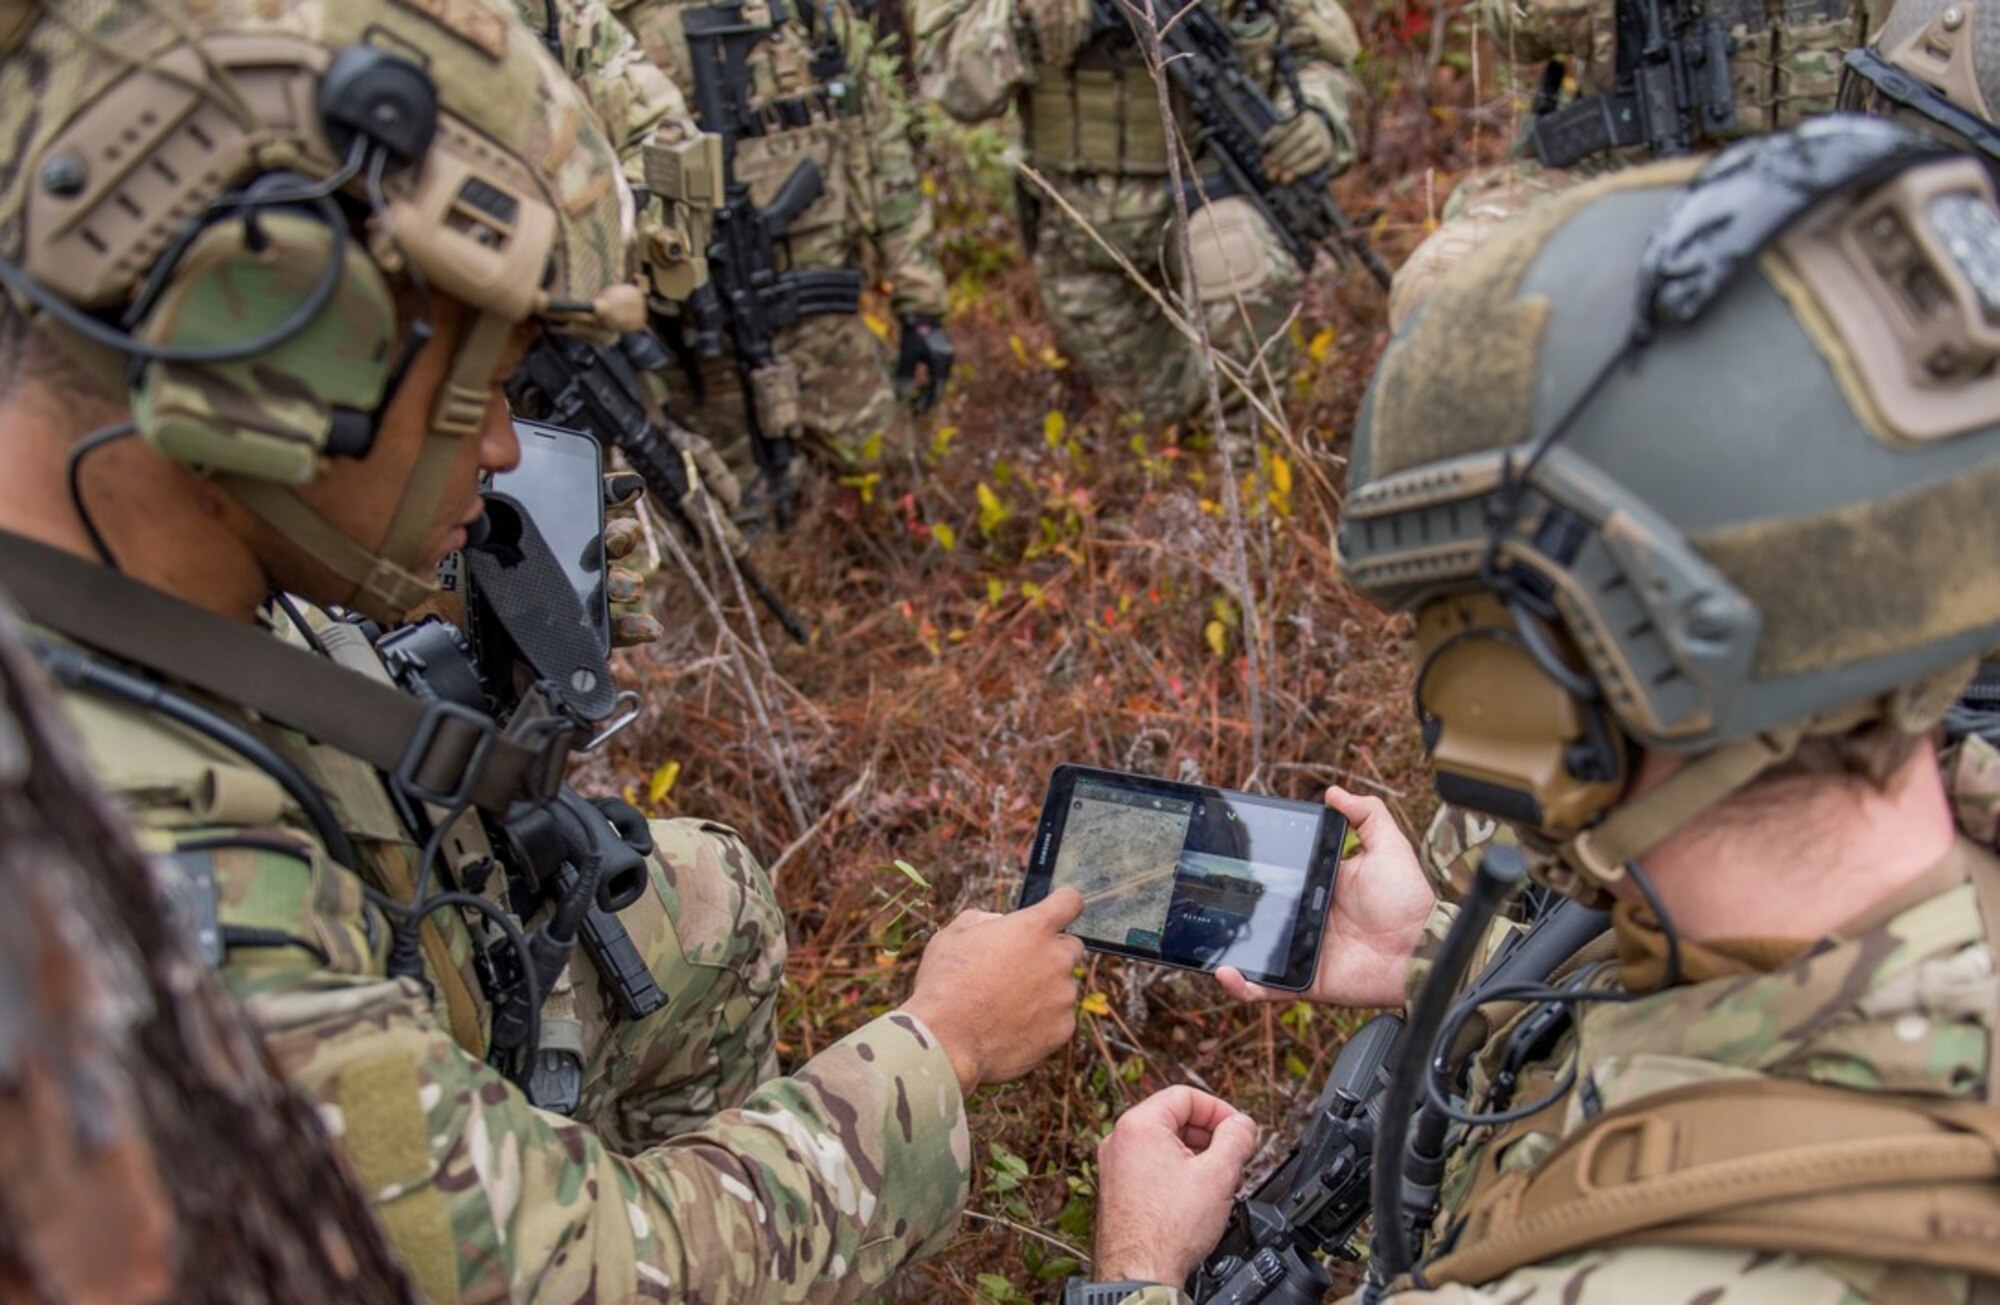 Members of the 6th Special Operations Squadron, perform a training exercise showcasing the capabilities of the Advanced Battle Management System at Duke Field, Fla., Dec. 17, 2019. (U.S. Air Force photo by Tech. Sgt. Joshua J. Garcia)